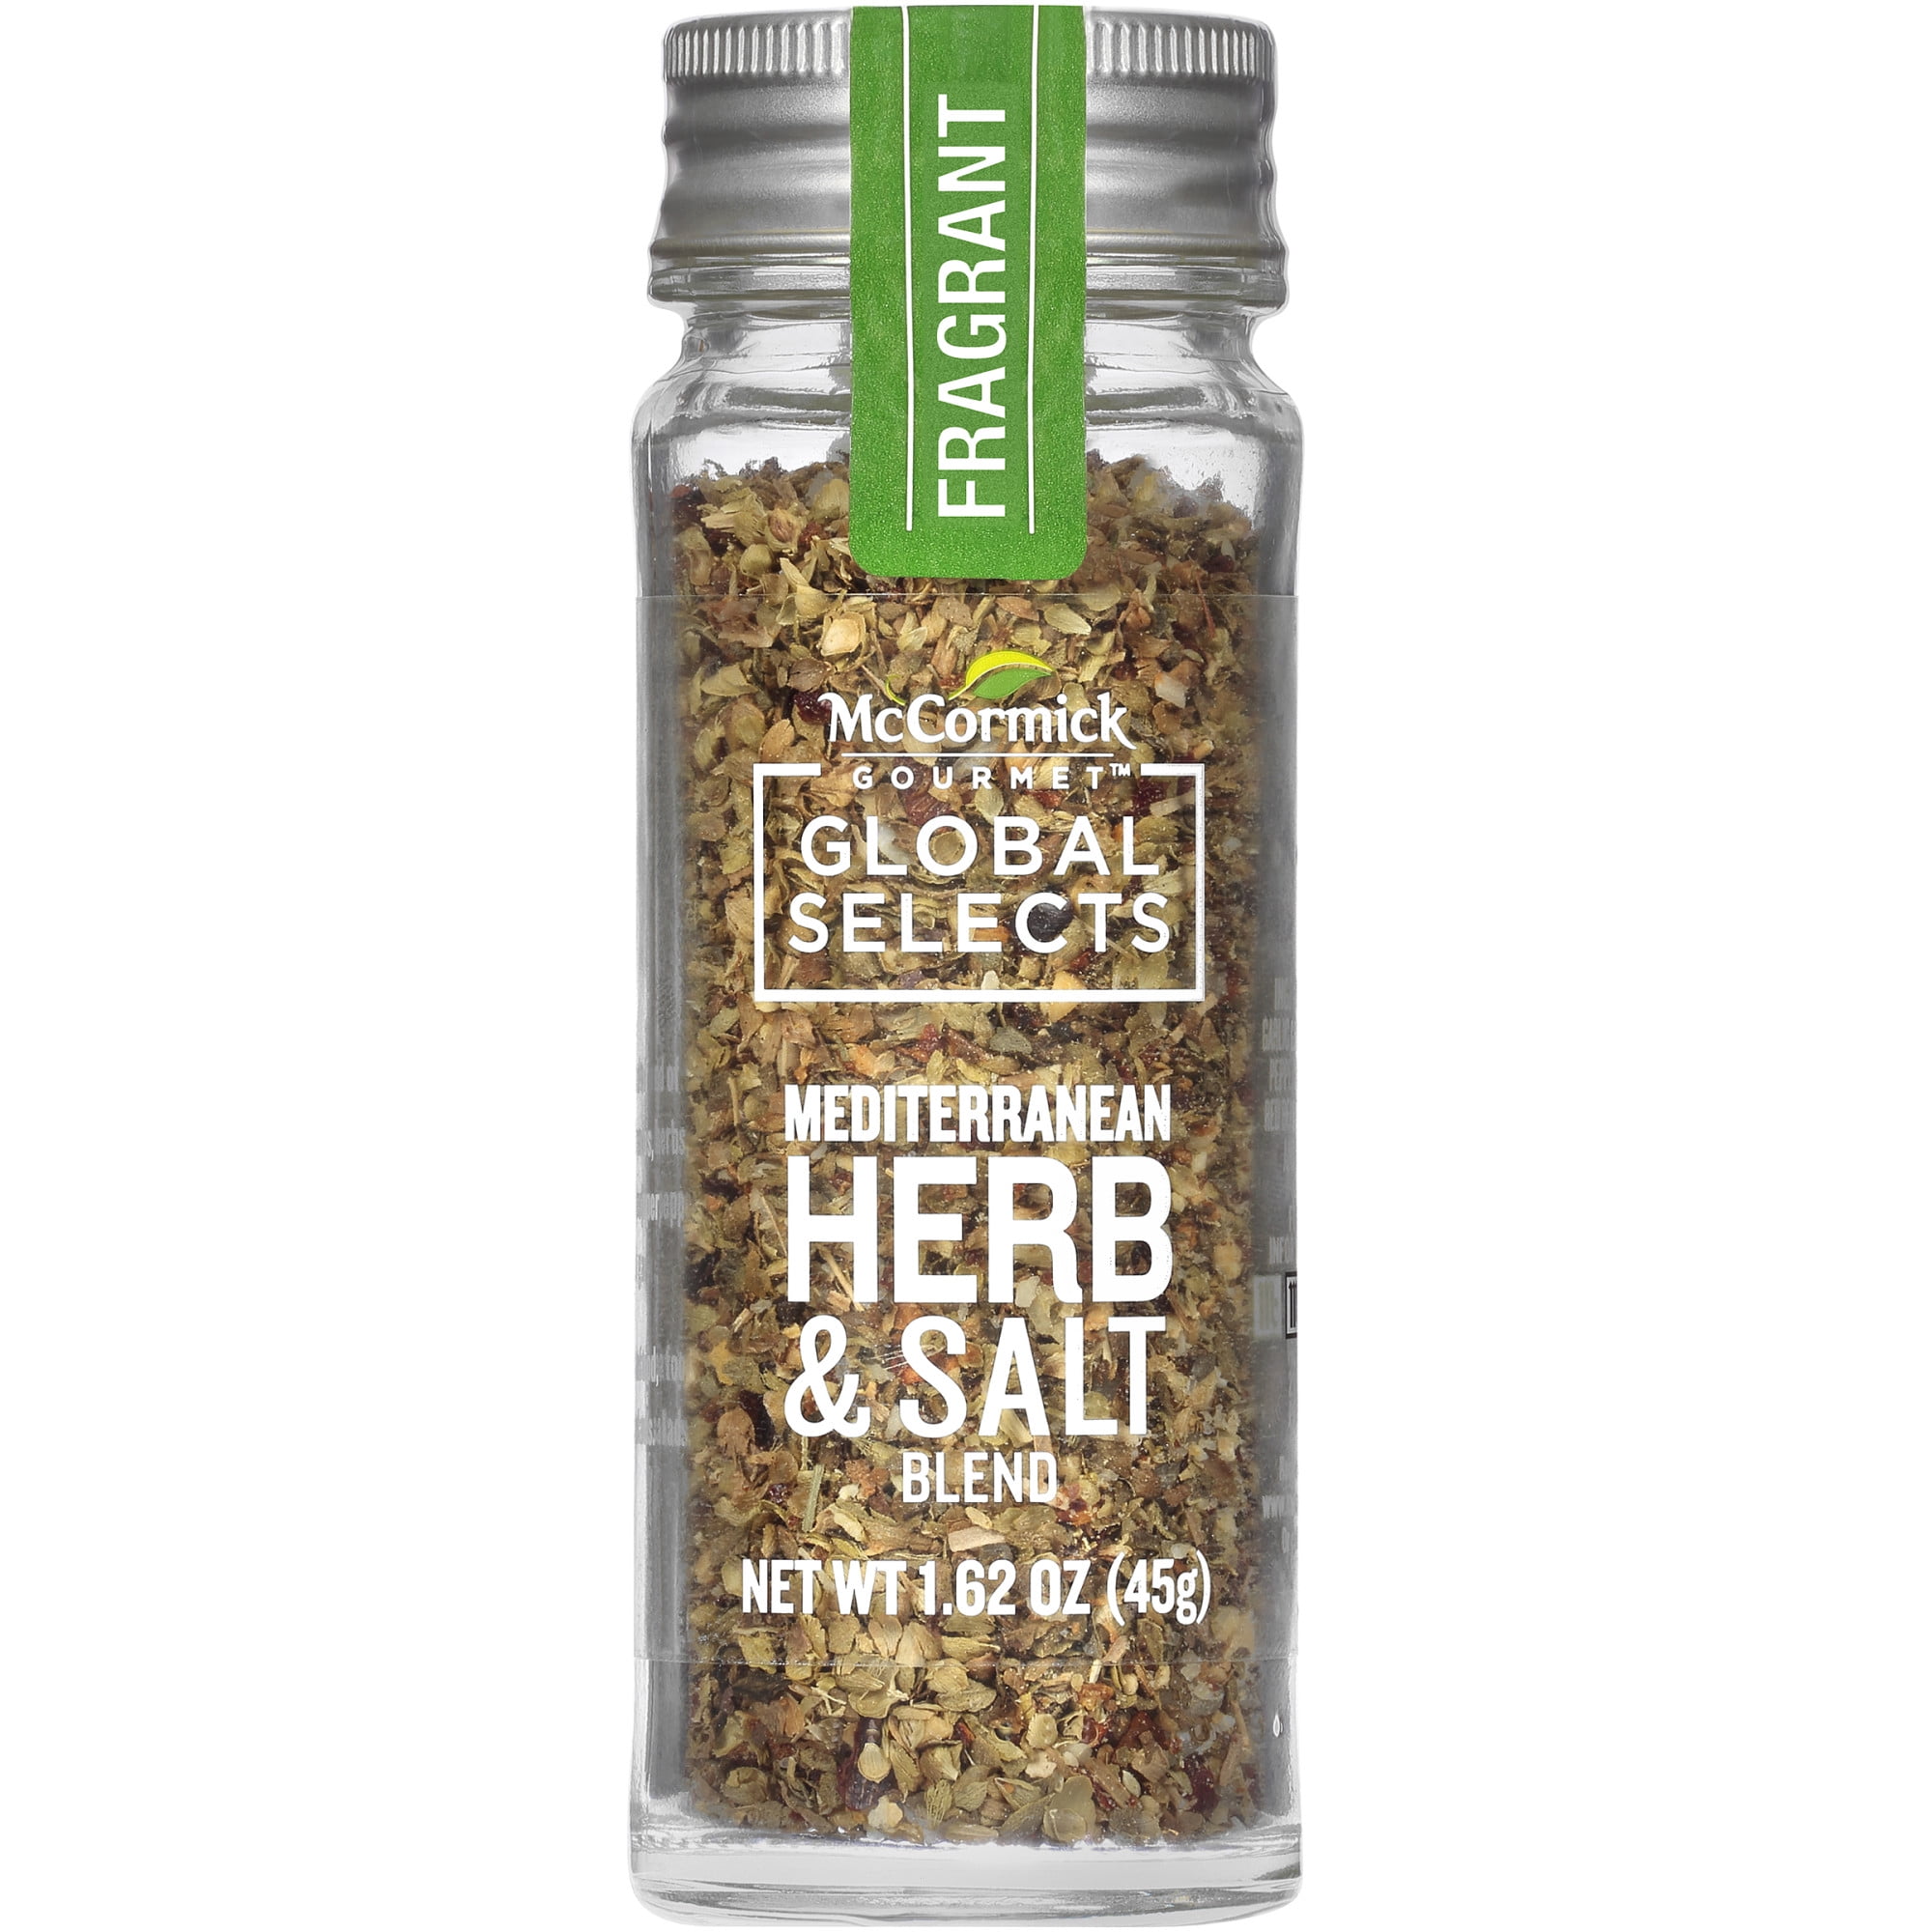 Organic Mediterranean Herb and Spice Blend Seasoning – Aromatic Spice Blends